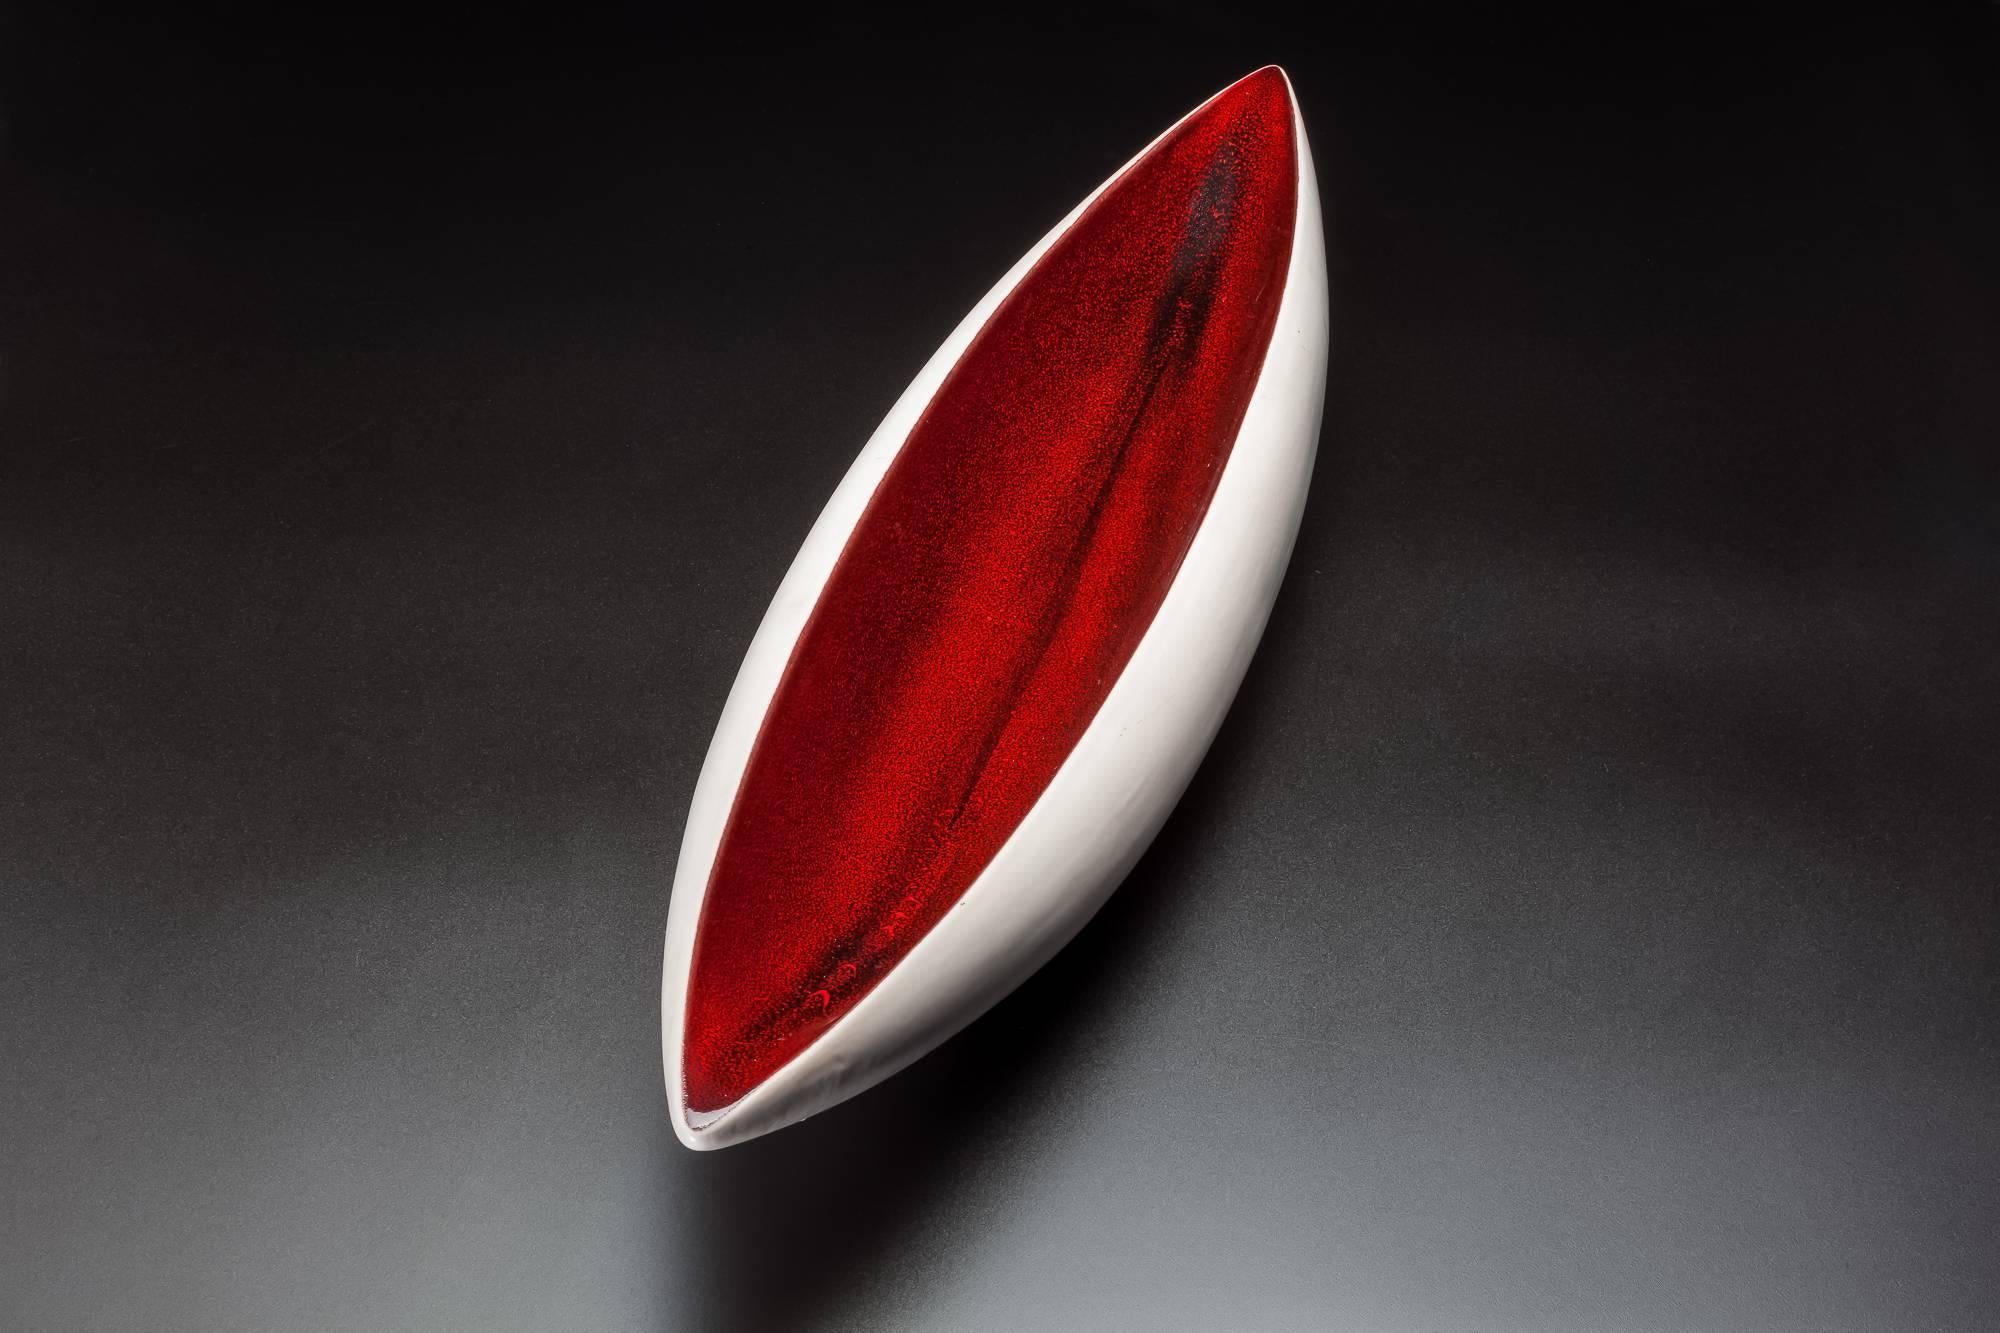 Important ceramic canoe shaped bowl by very famous French artist Pol Chambost (1906 - 1983) with red enamel interior and white enamel exterior.
Incised signature, numbered: 